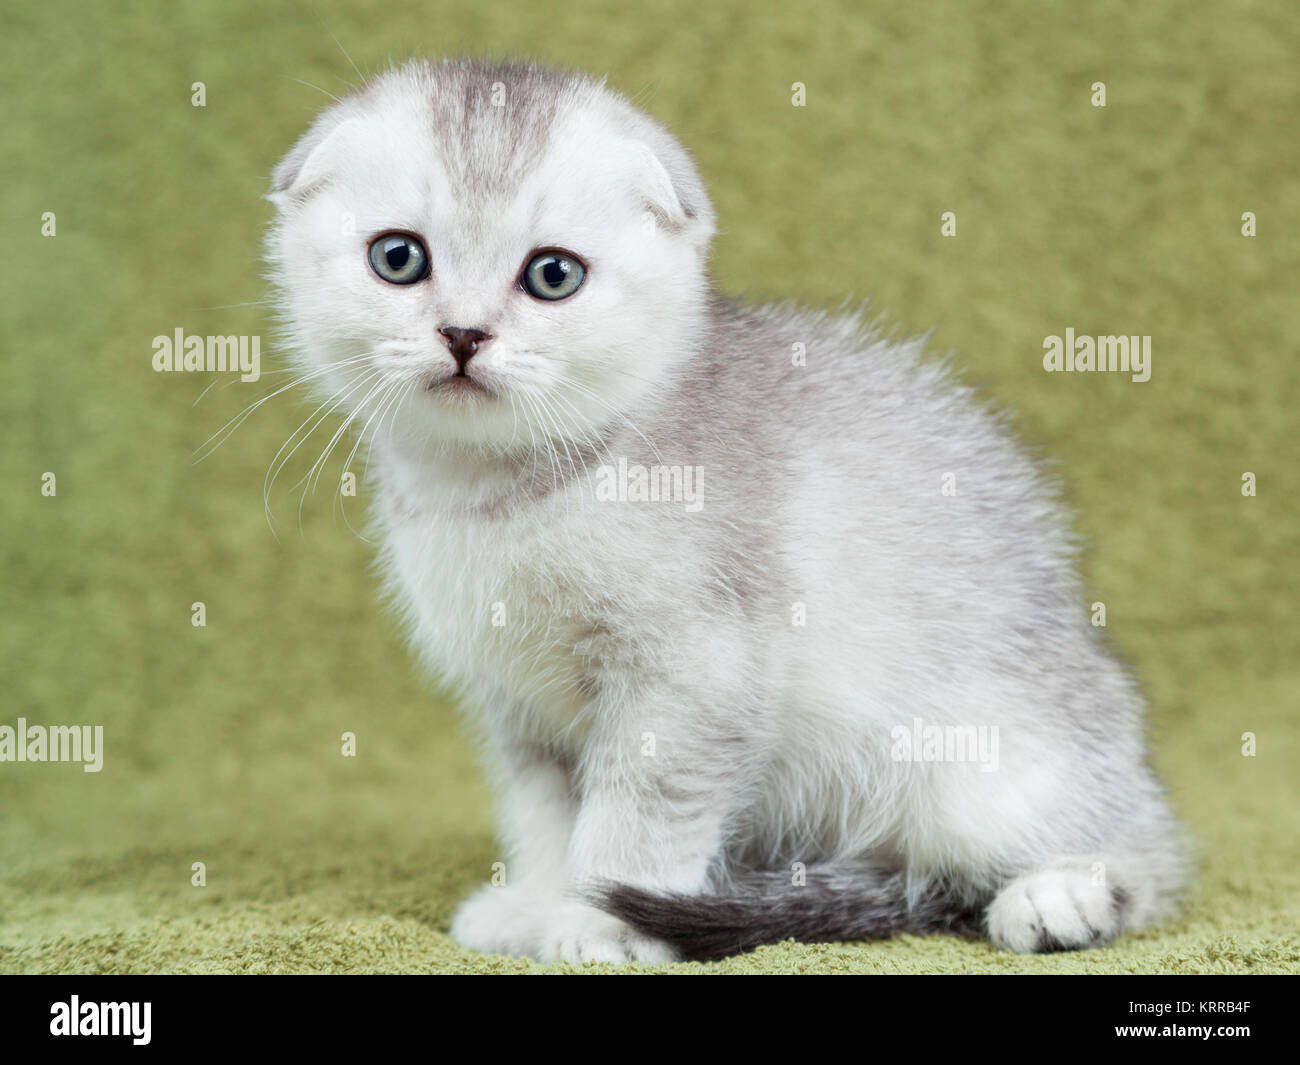 Scottish thoroughbred kitten with gray wool at green background Stock Photo